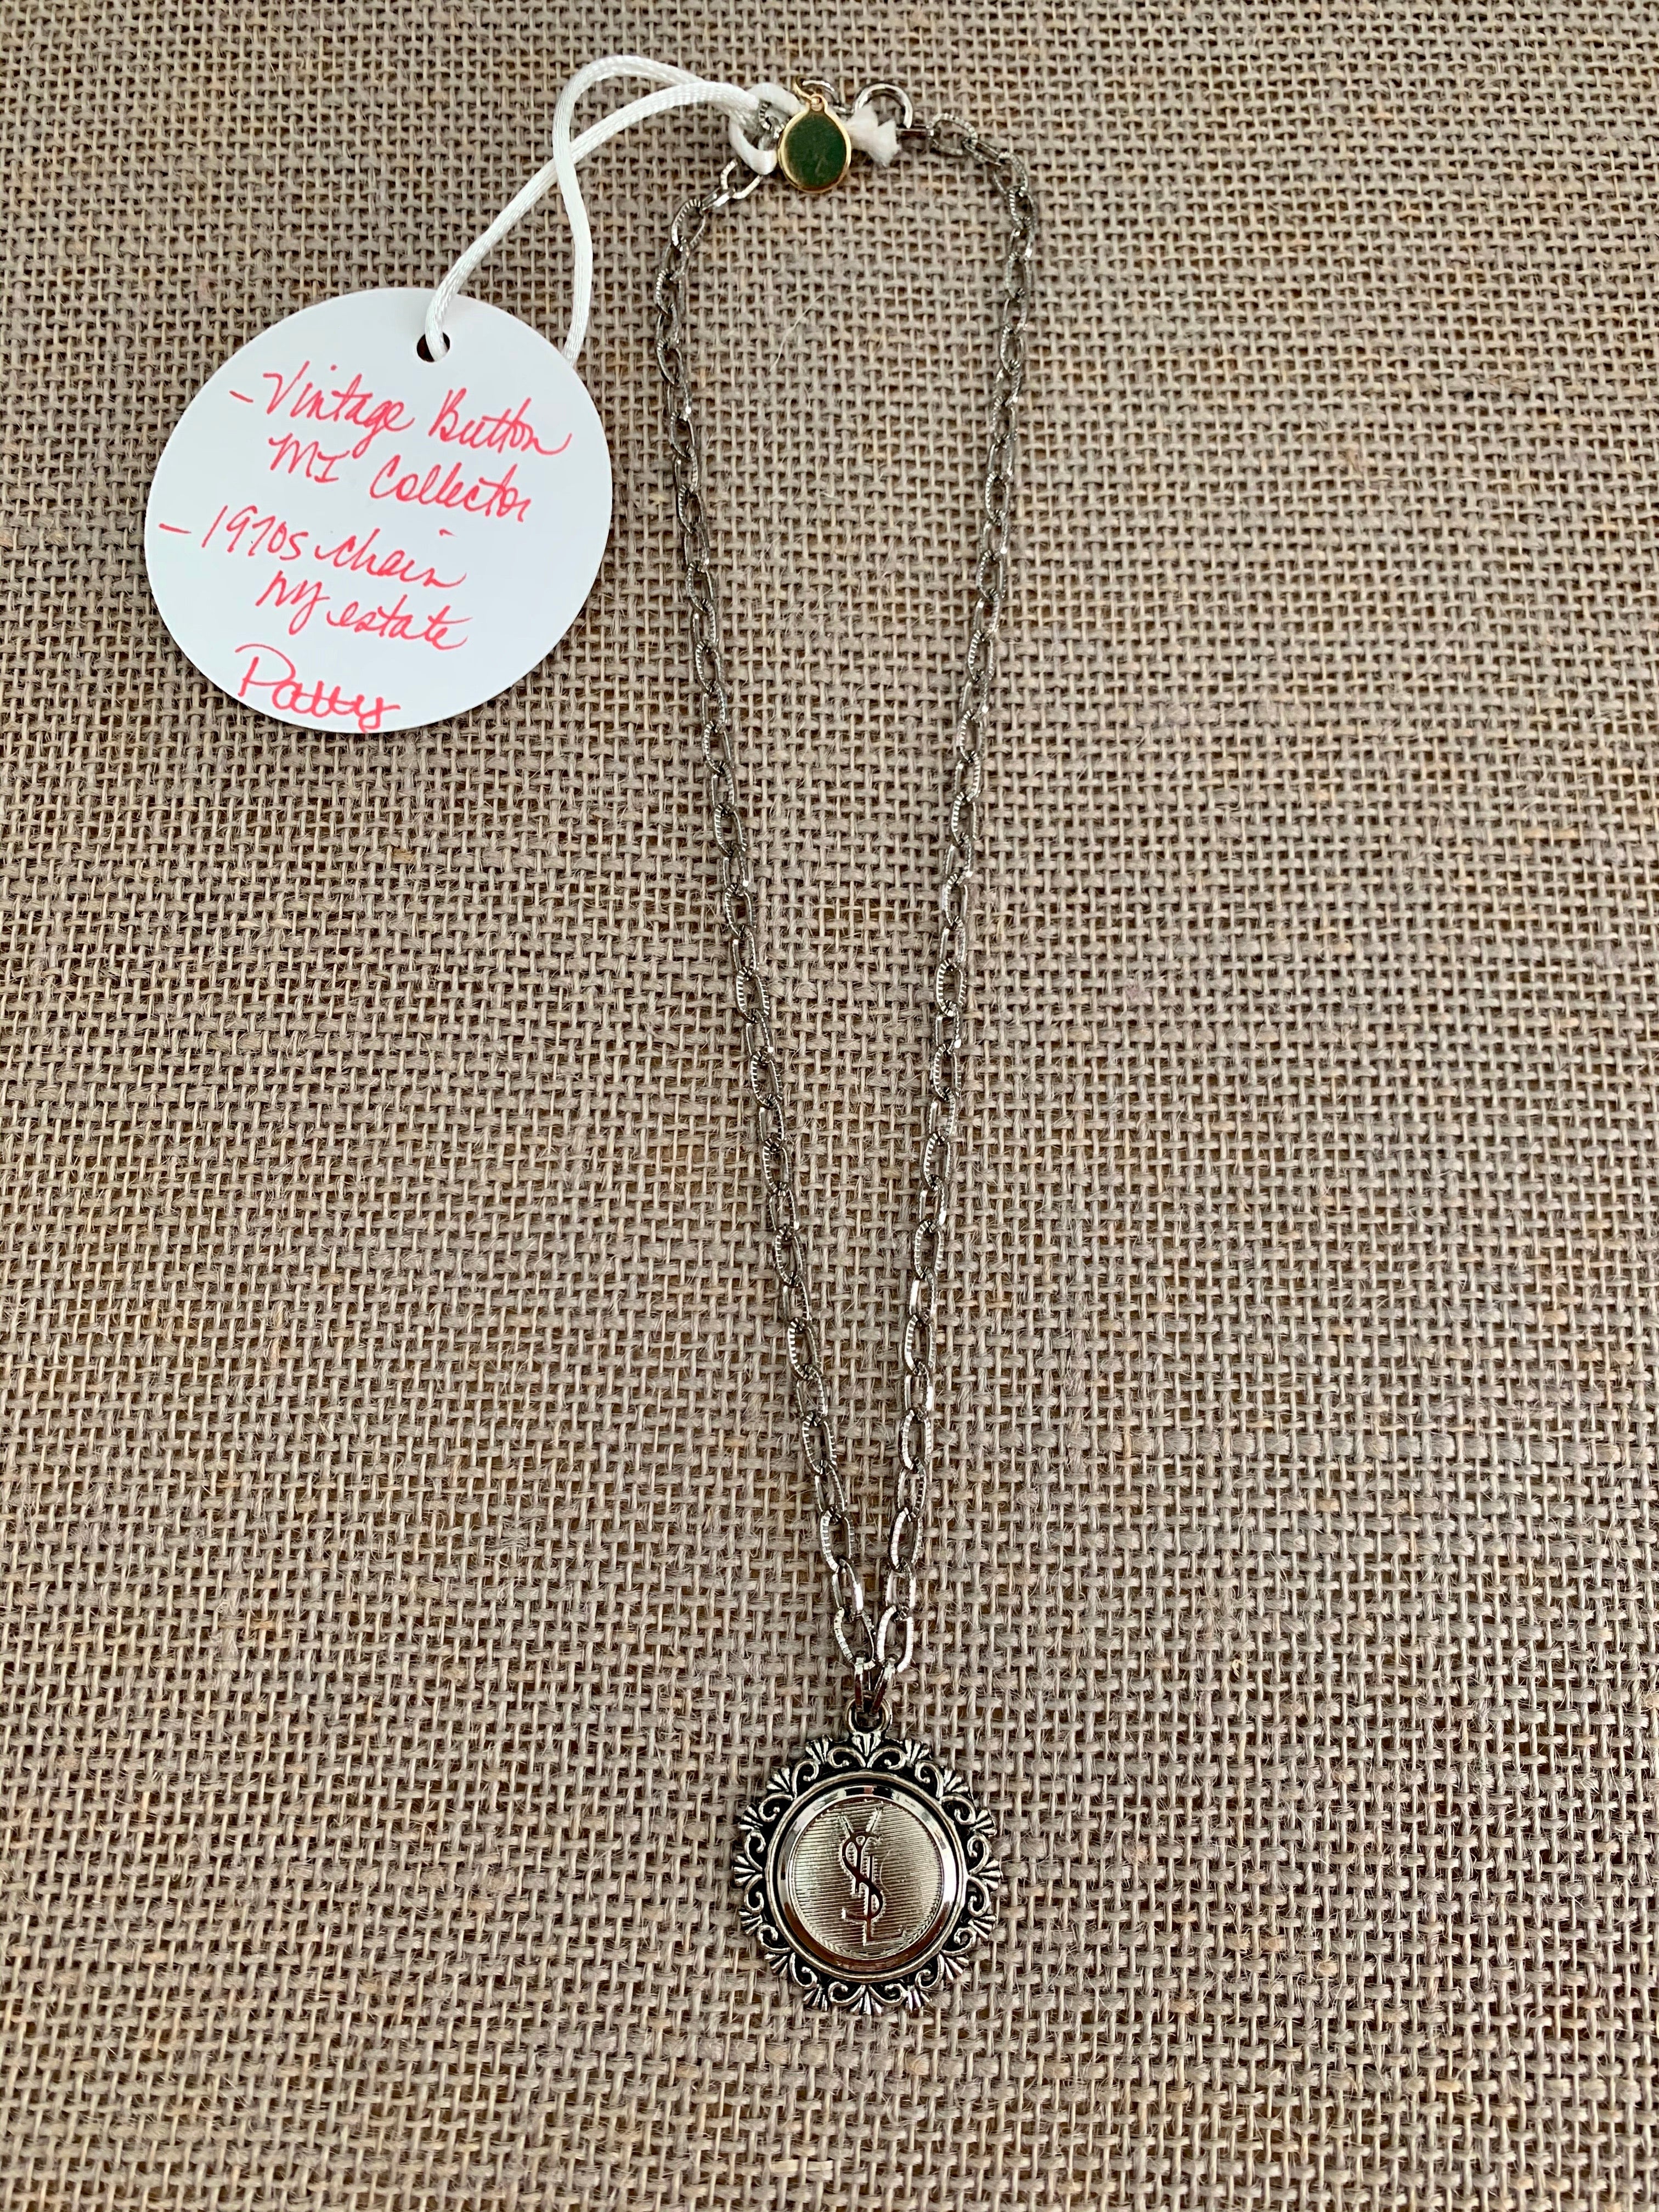 Patty YSL Button Necklace